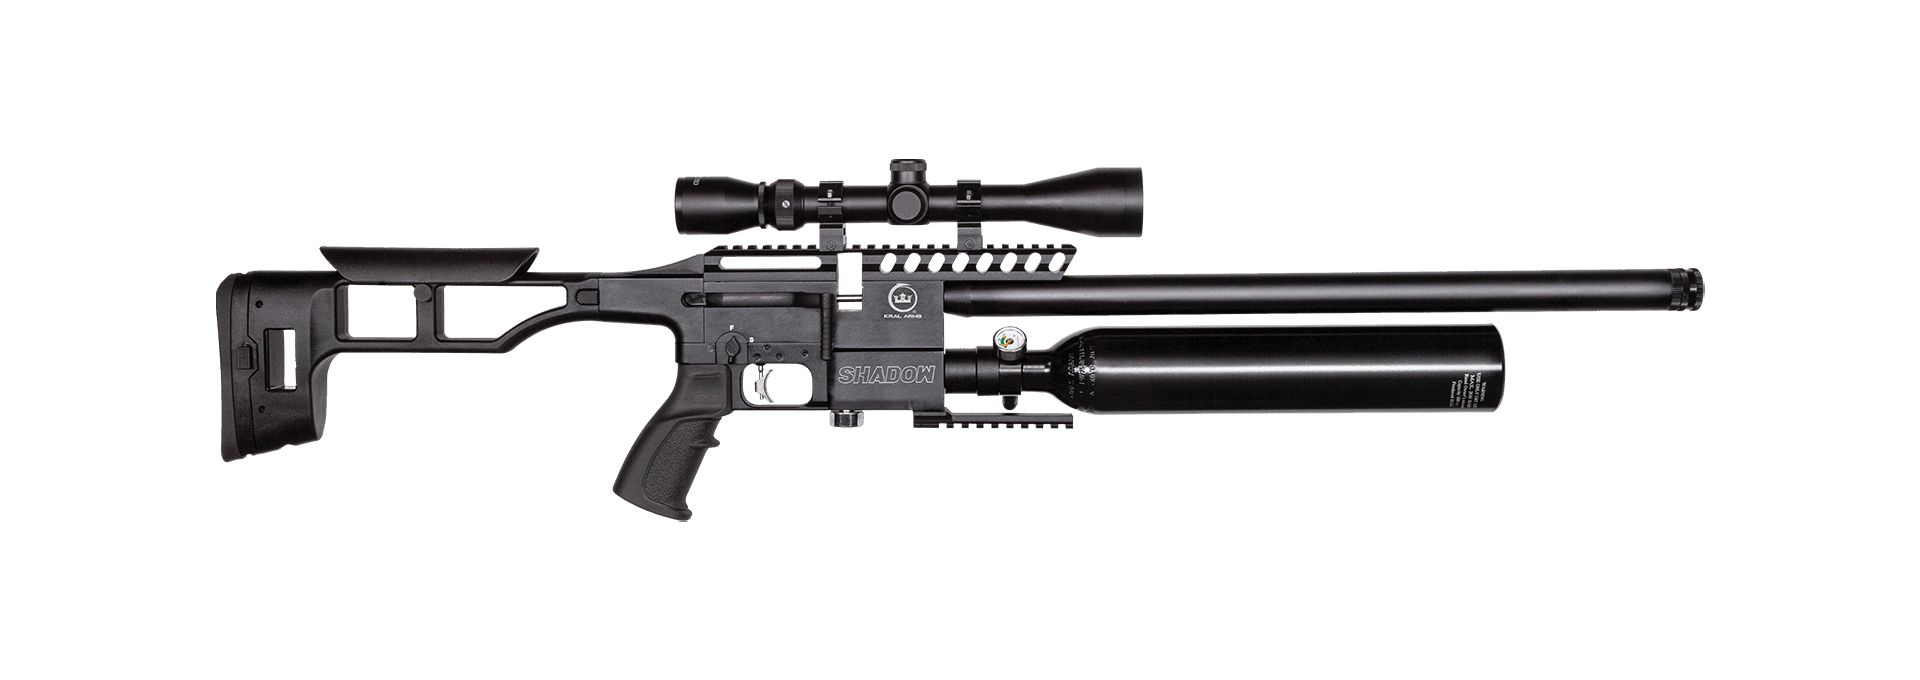 KRAL PUNCHER SHADOW PCP RIFLE .22 - SYNTH - NeonSales South Africa